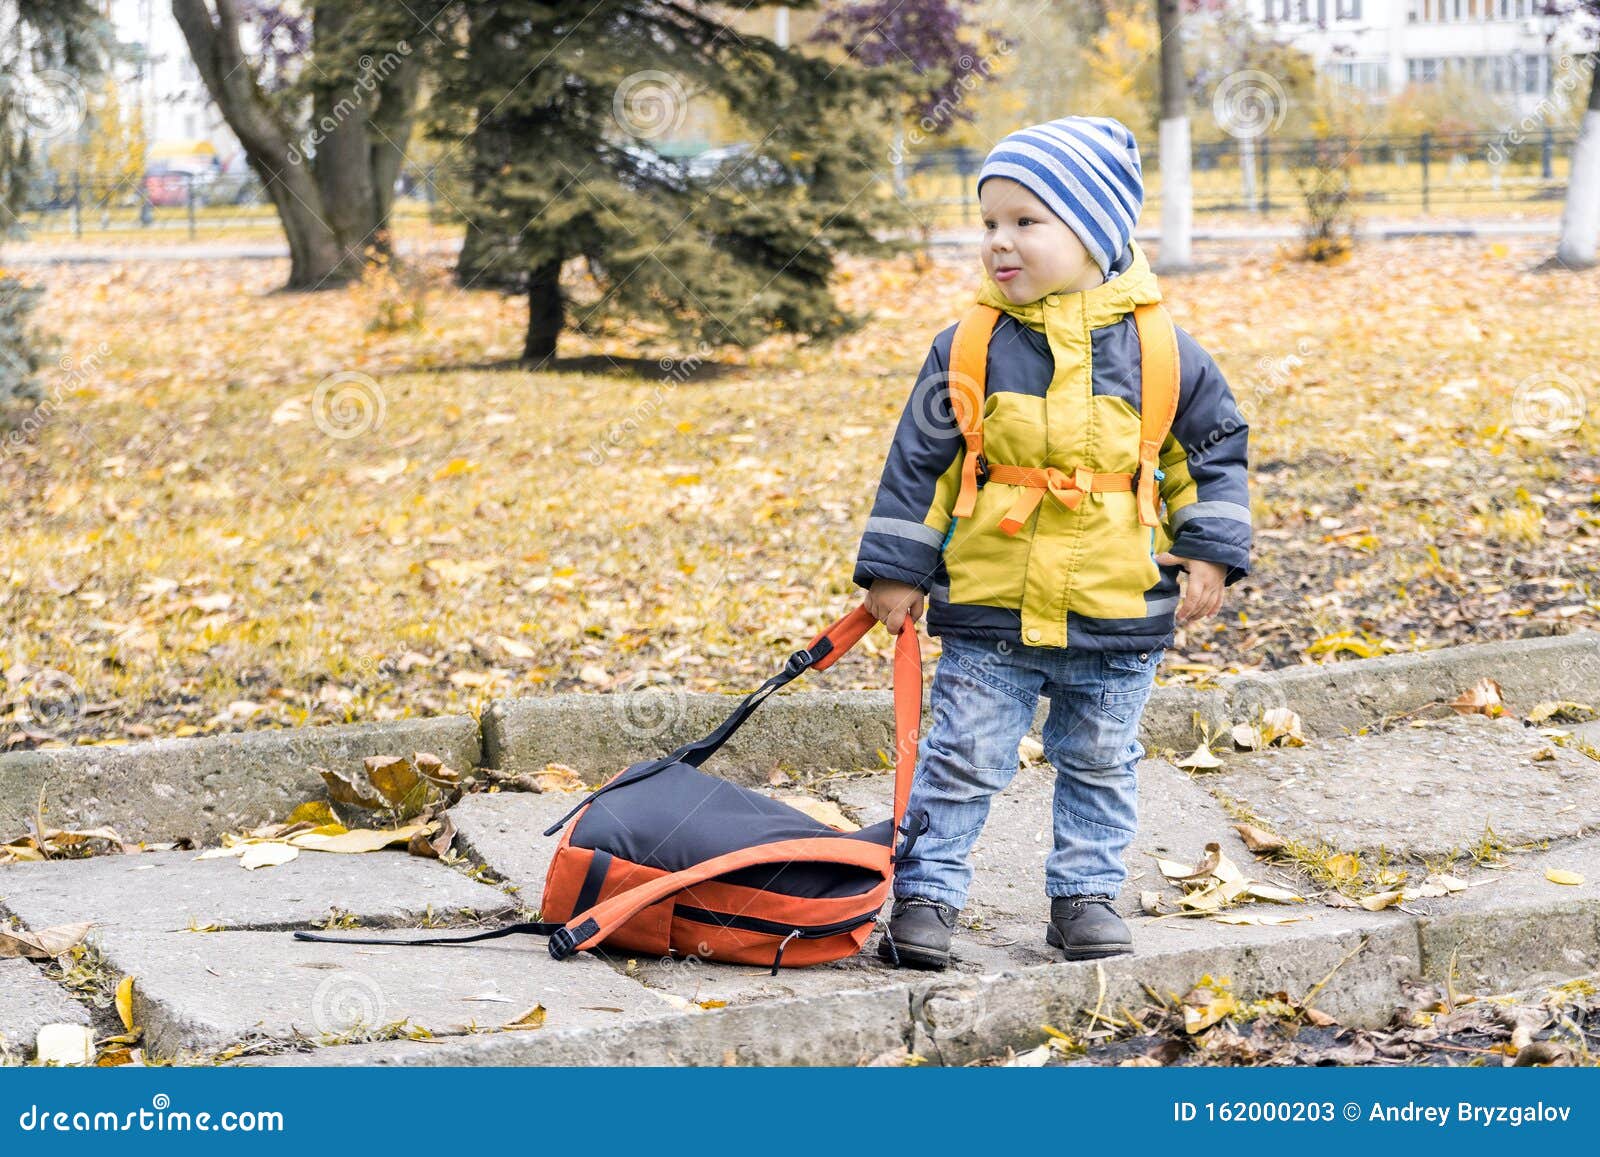 little hooligan boy dragged away his mother`s backpack and make grimace at her in autumn city park